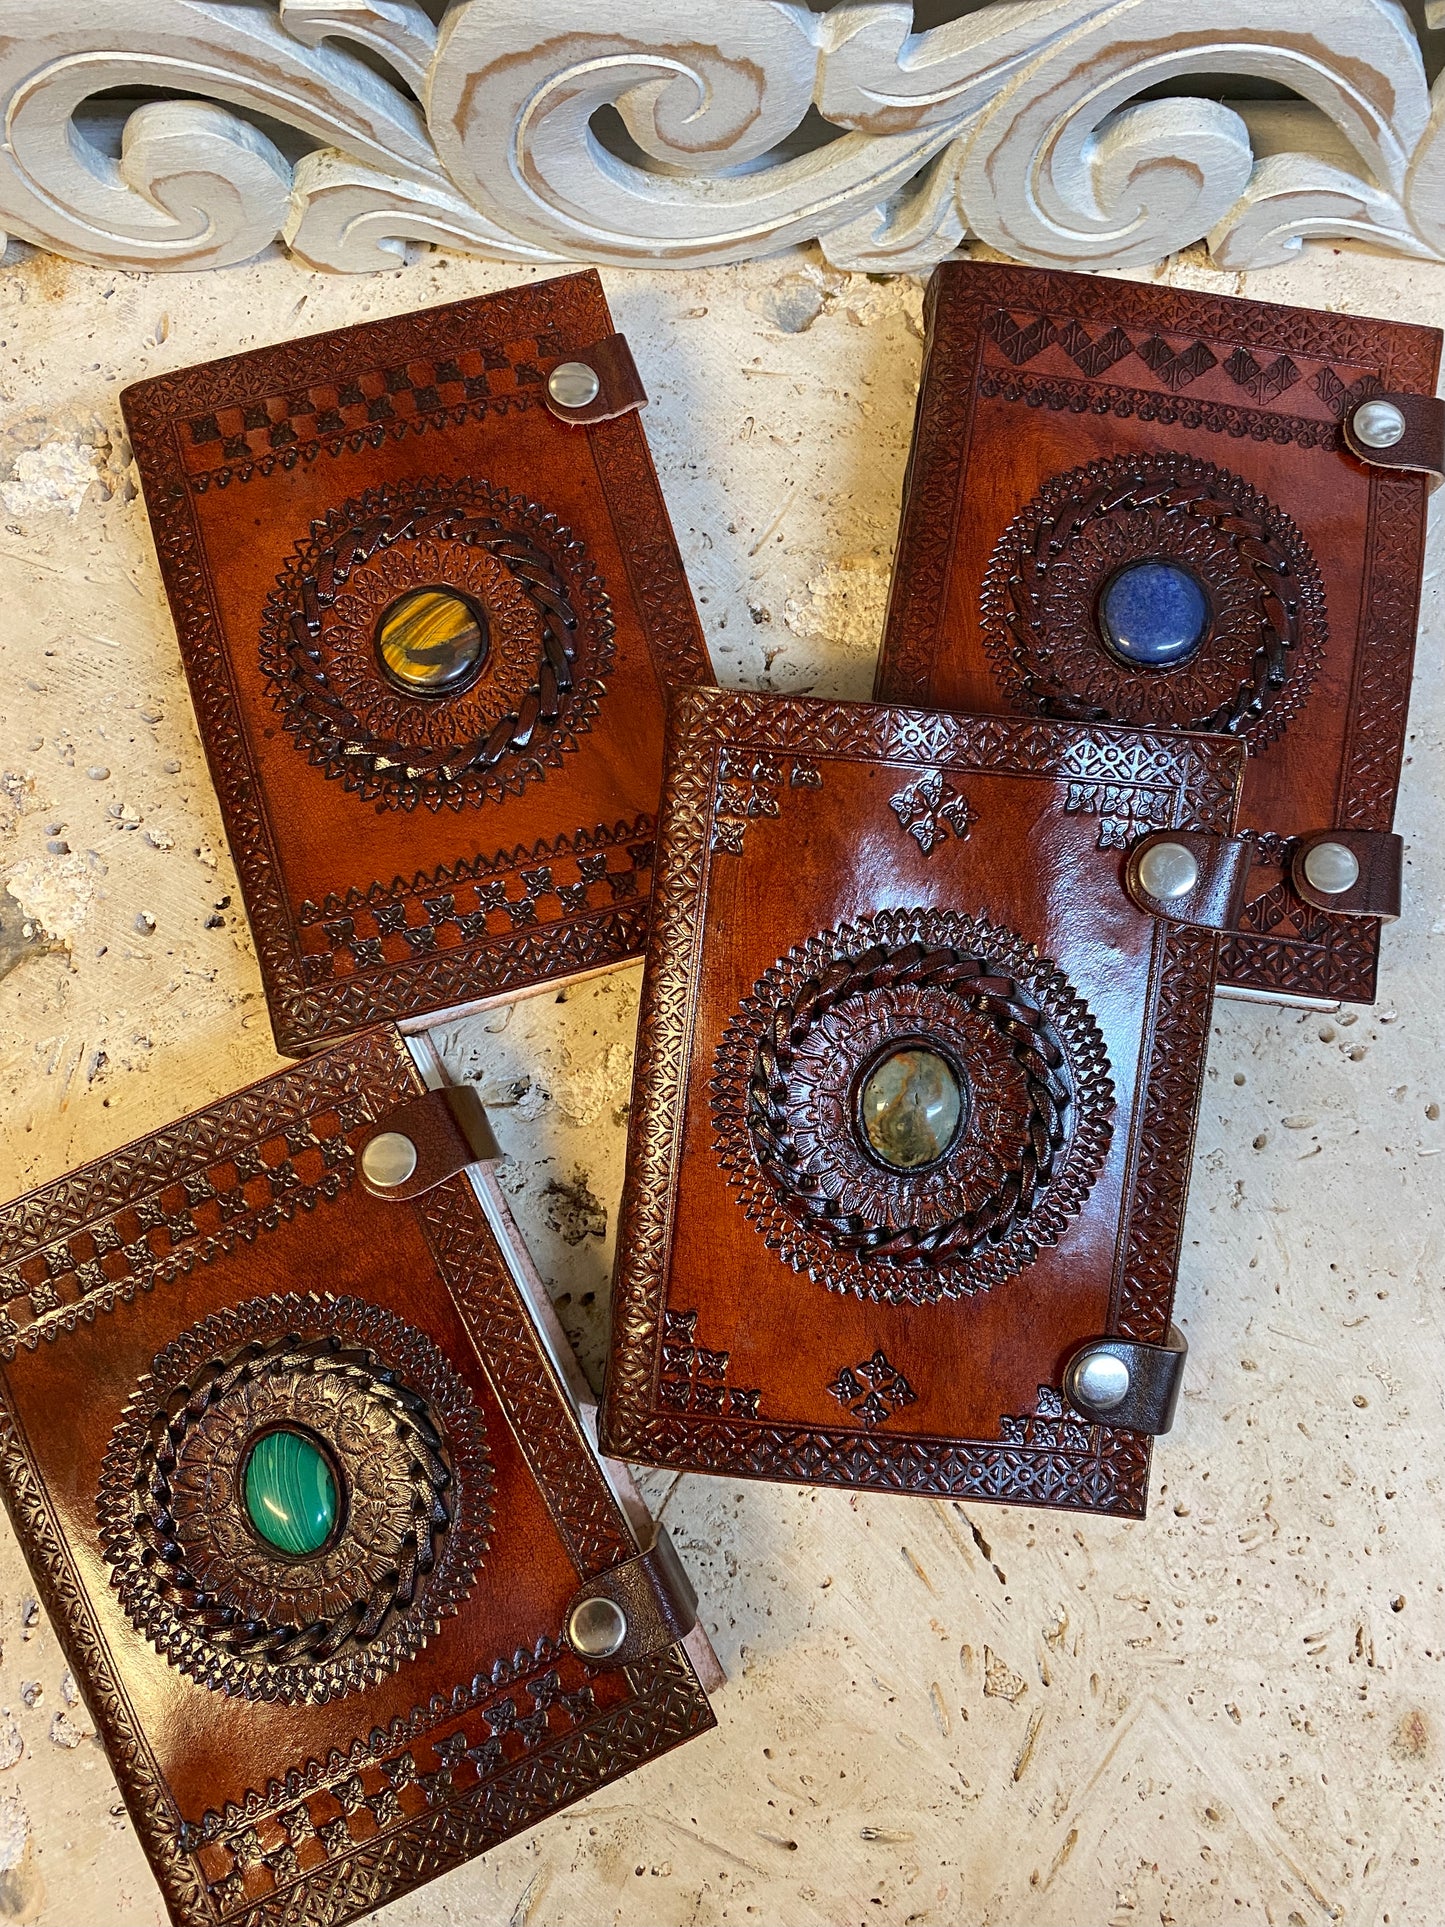 Hand Embossed Camel leather Journal with Gemstones & Button Clasp - 5" x 7" x 1"